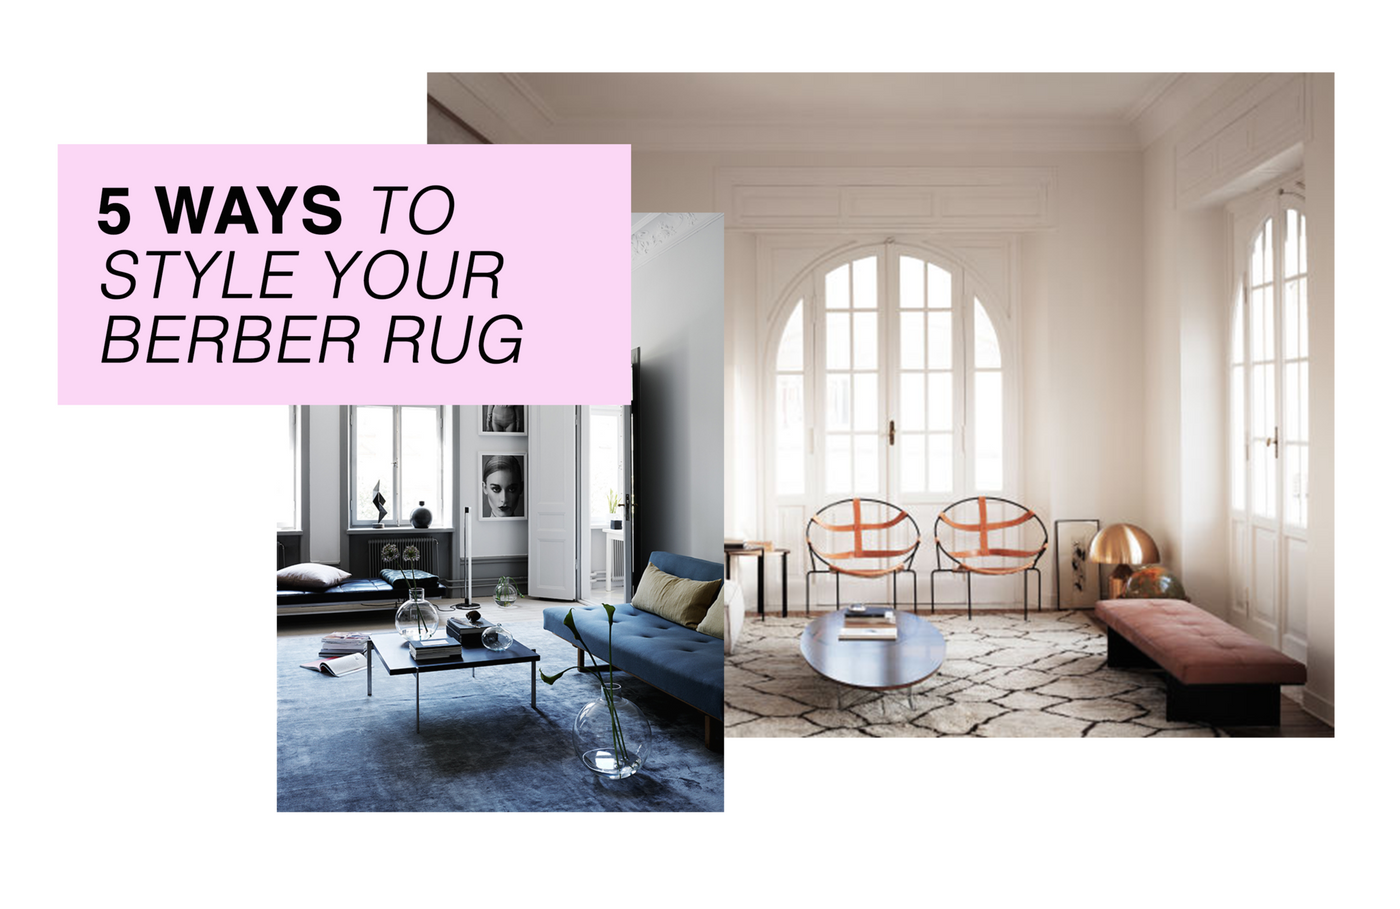 5 Ways To Style Your Berber Rug